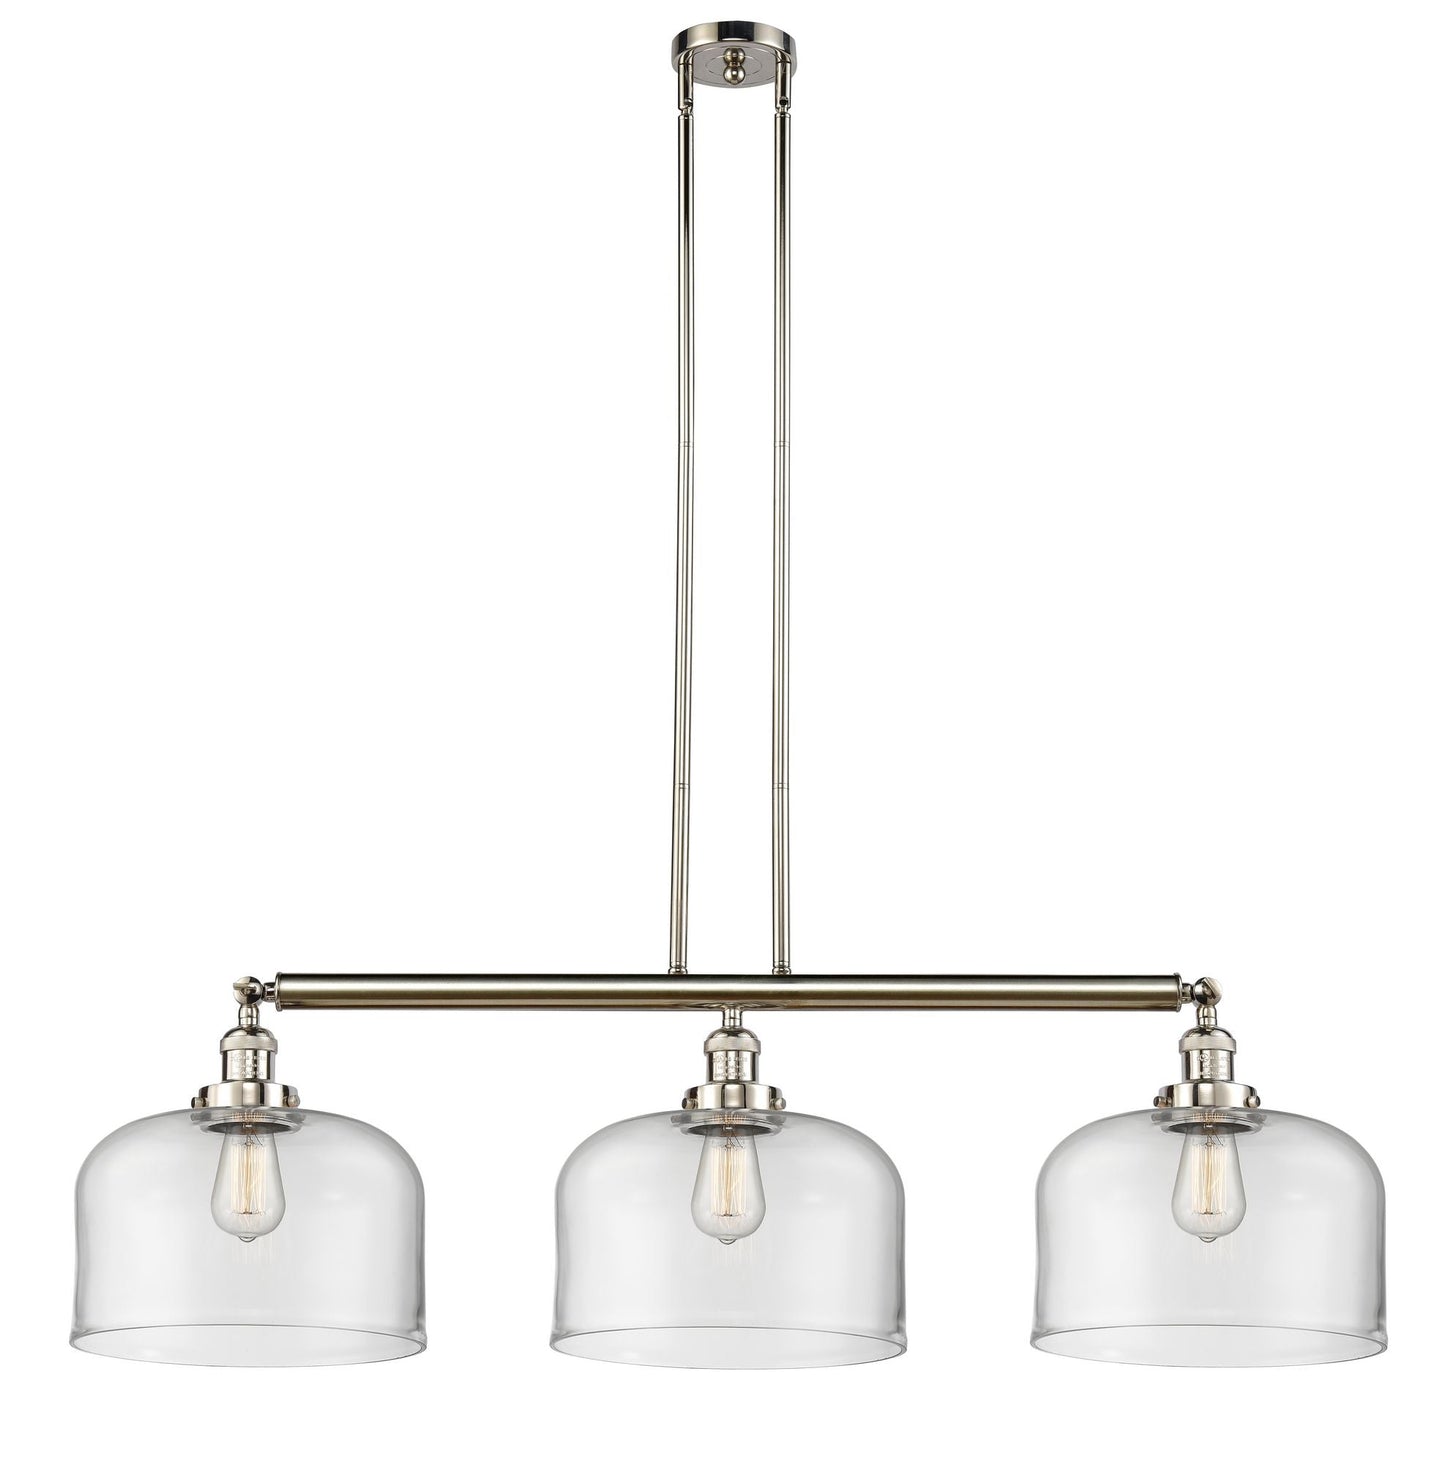 213-PN-G72-L 3-Light 42" Polished Nickel Island Light - Clear X-Large Bell Glass - LED Bulb - Dimmensions: 42 x 12 x 13<br>Minimum Height : 22.25<br>Maximum Height : 46.25 - Sloped Ceiling Compatible: Yes